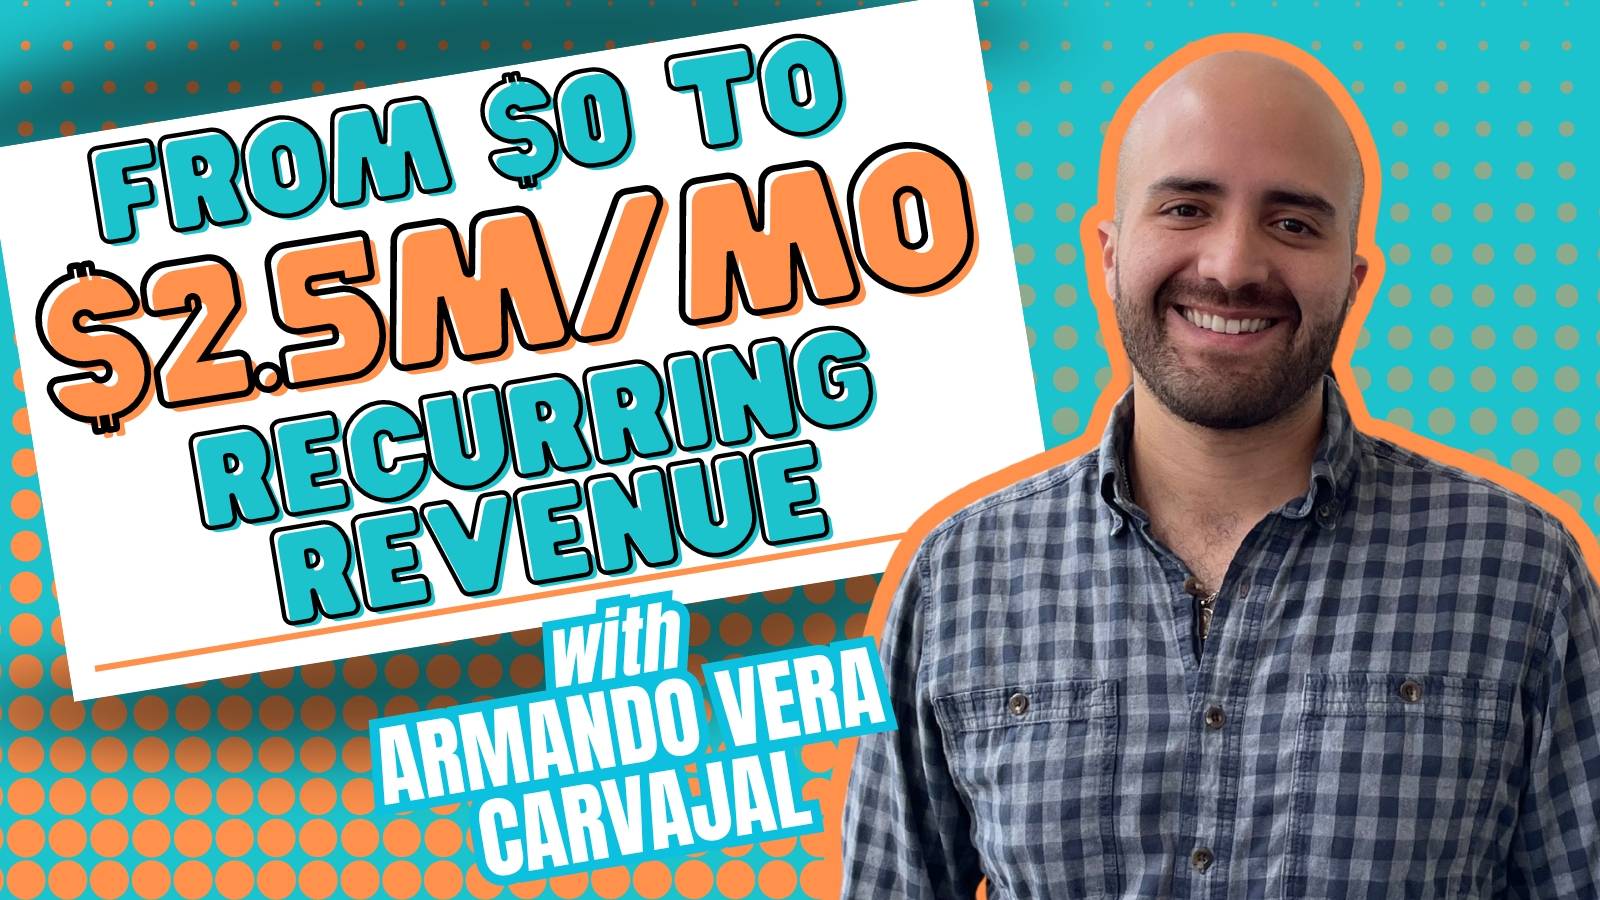 From $0 to $2.5M in Monthly Recurring Revenue with Armando Vera Carvajal